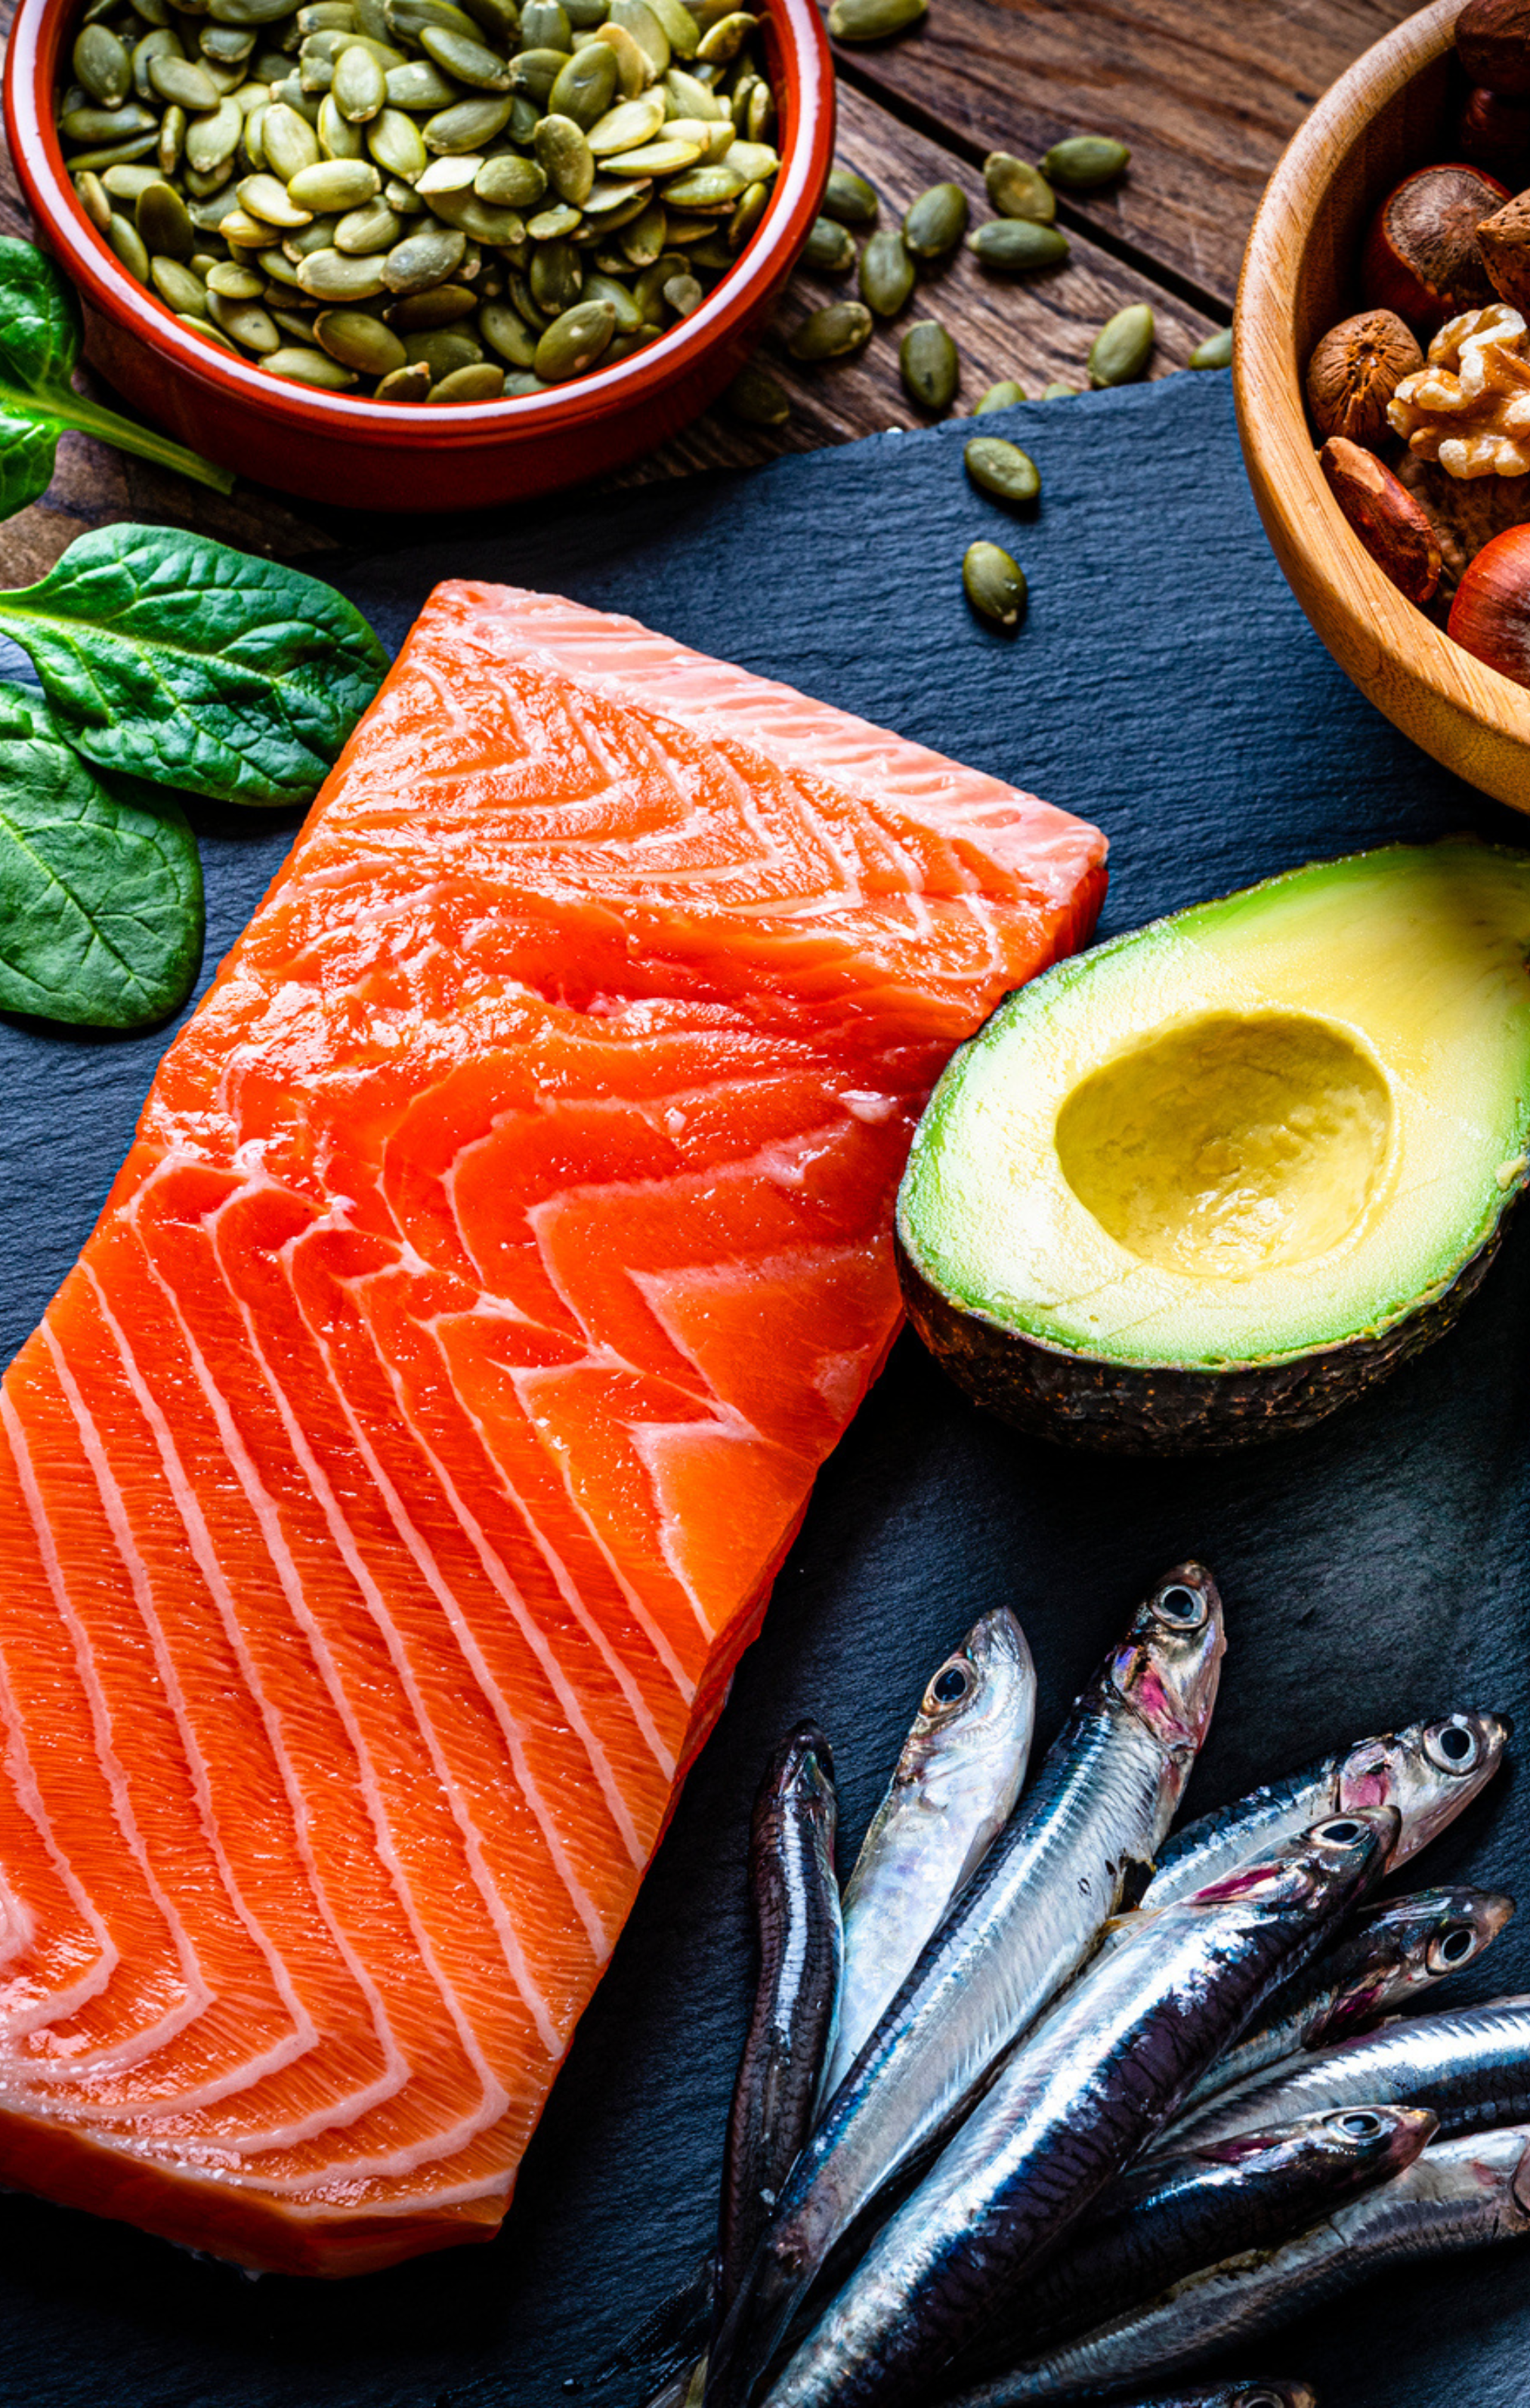 Image of healthy fats like sardines, avocados, nuts, seeds, and salmon.